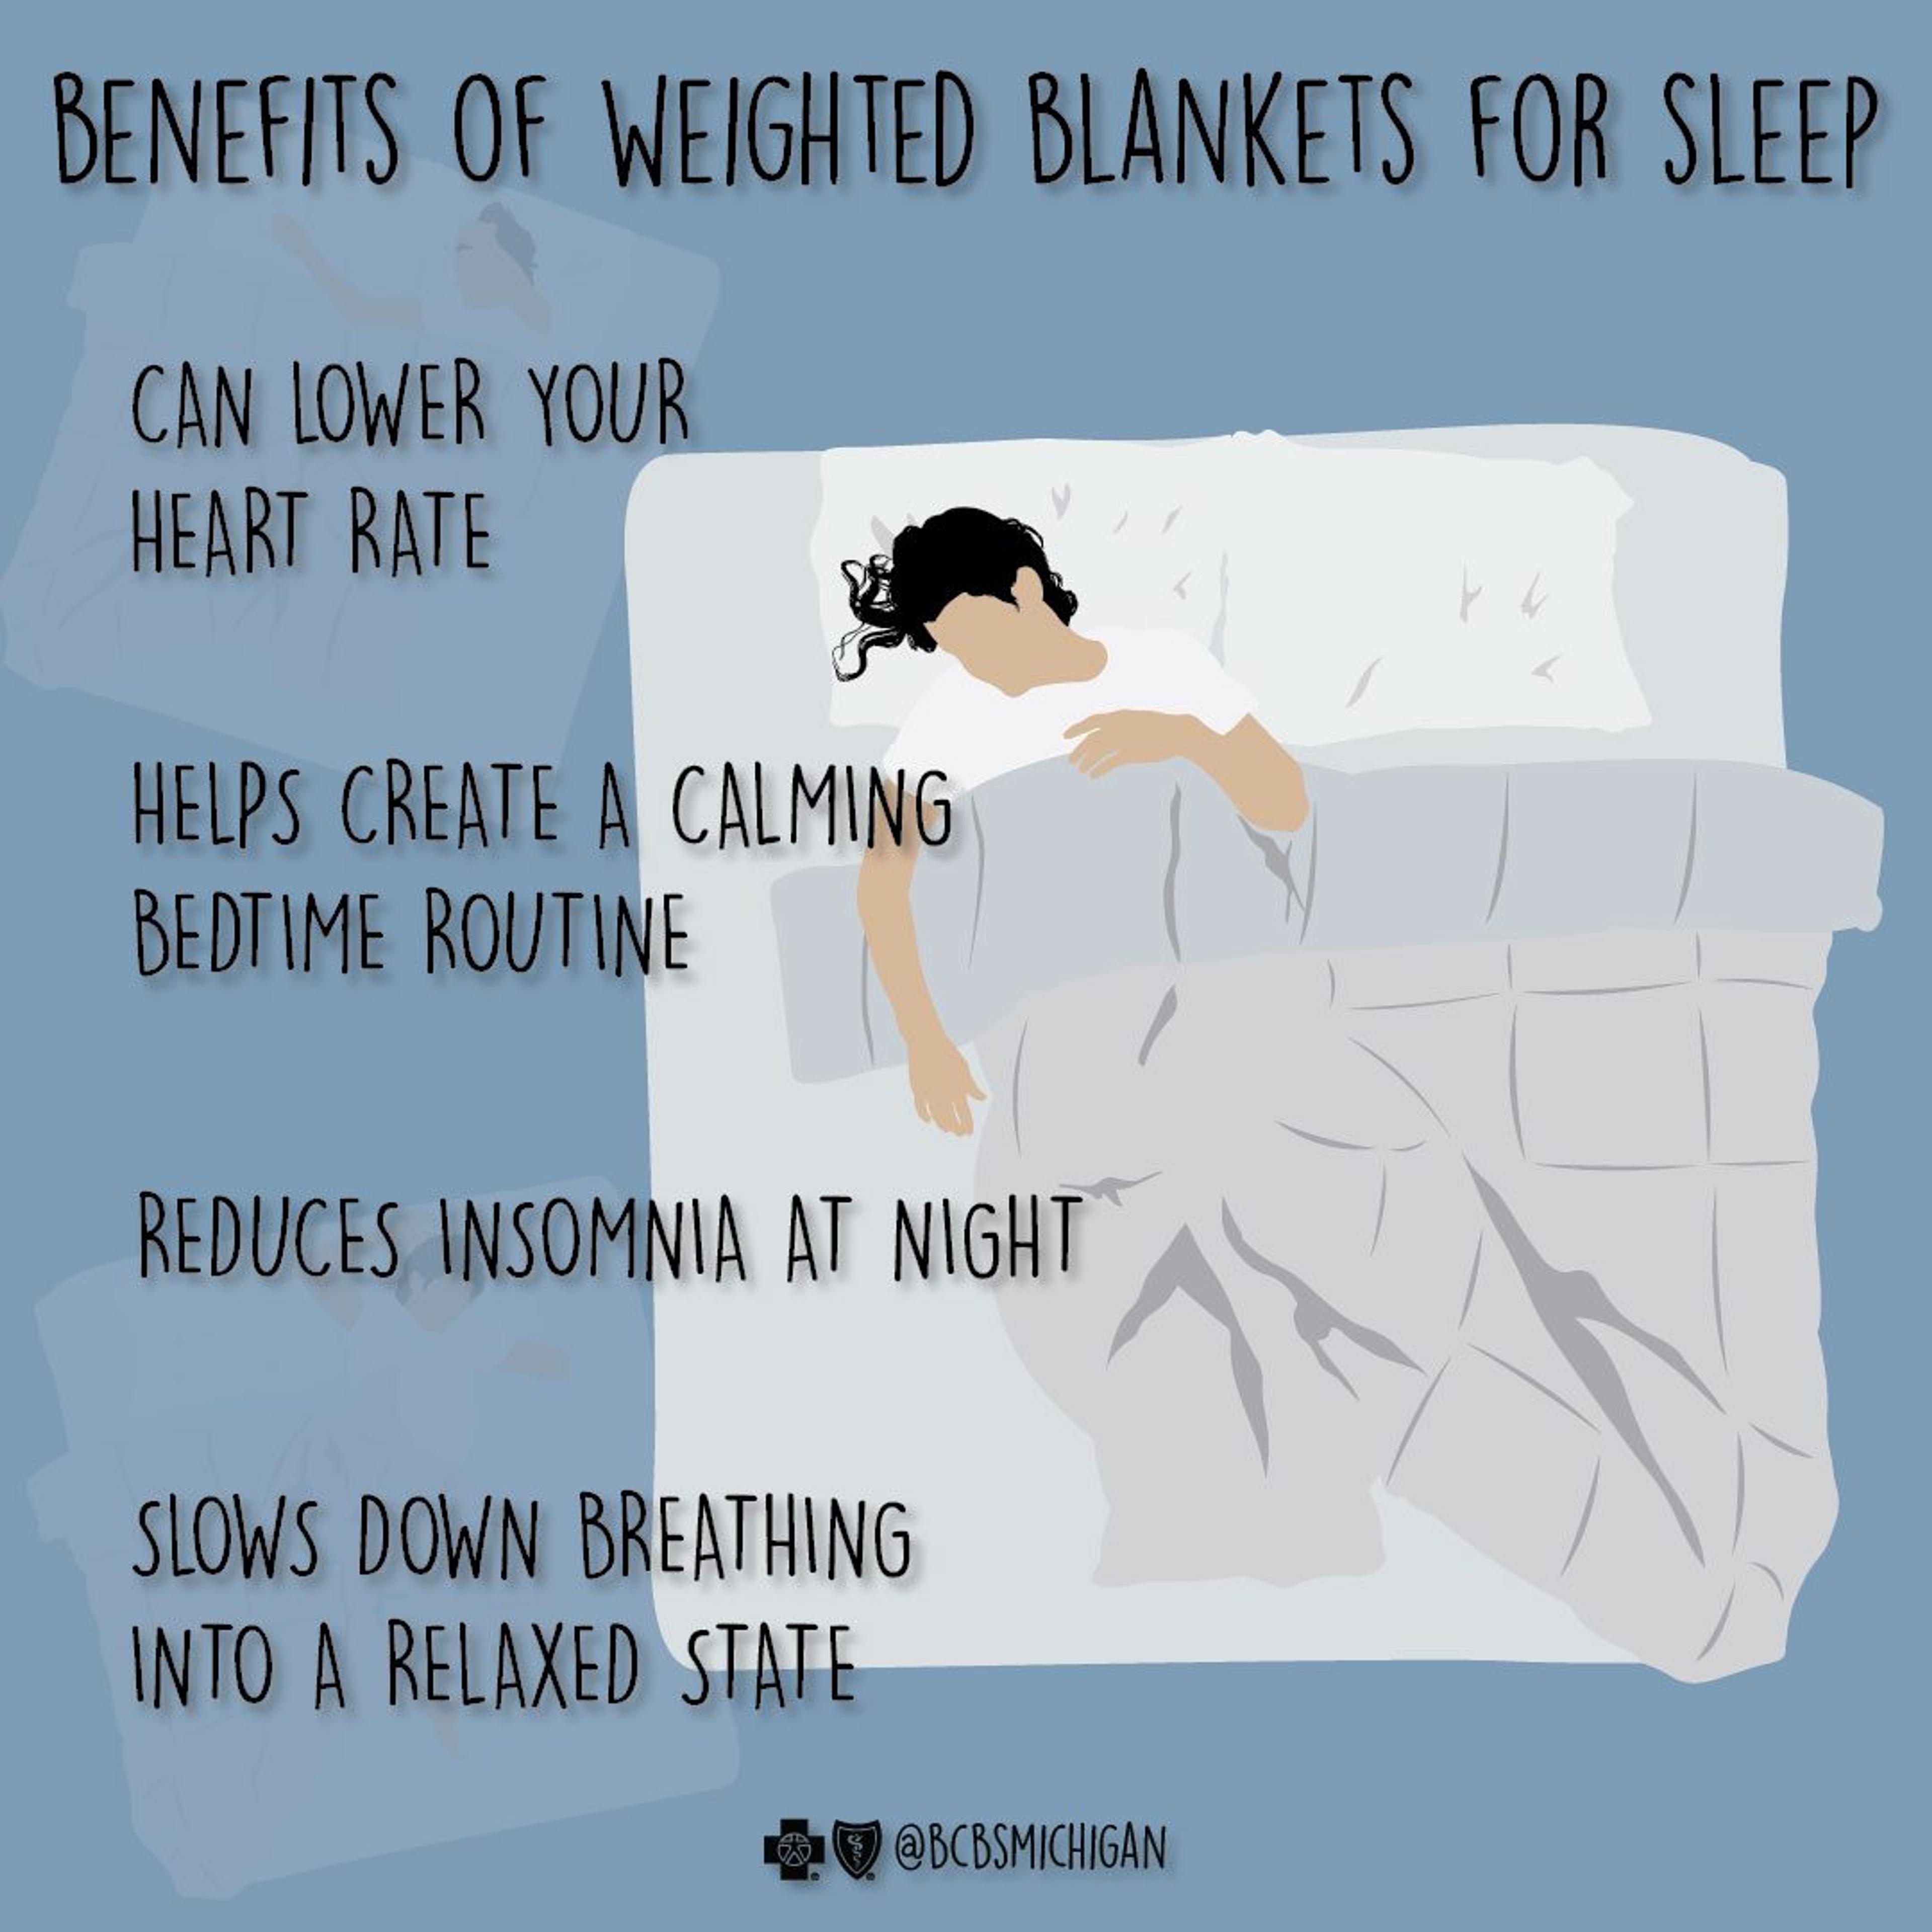 Benefits of Weighted Blankets for Sleep